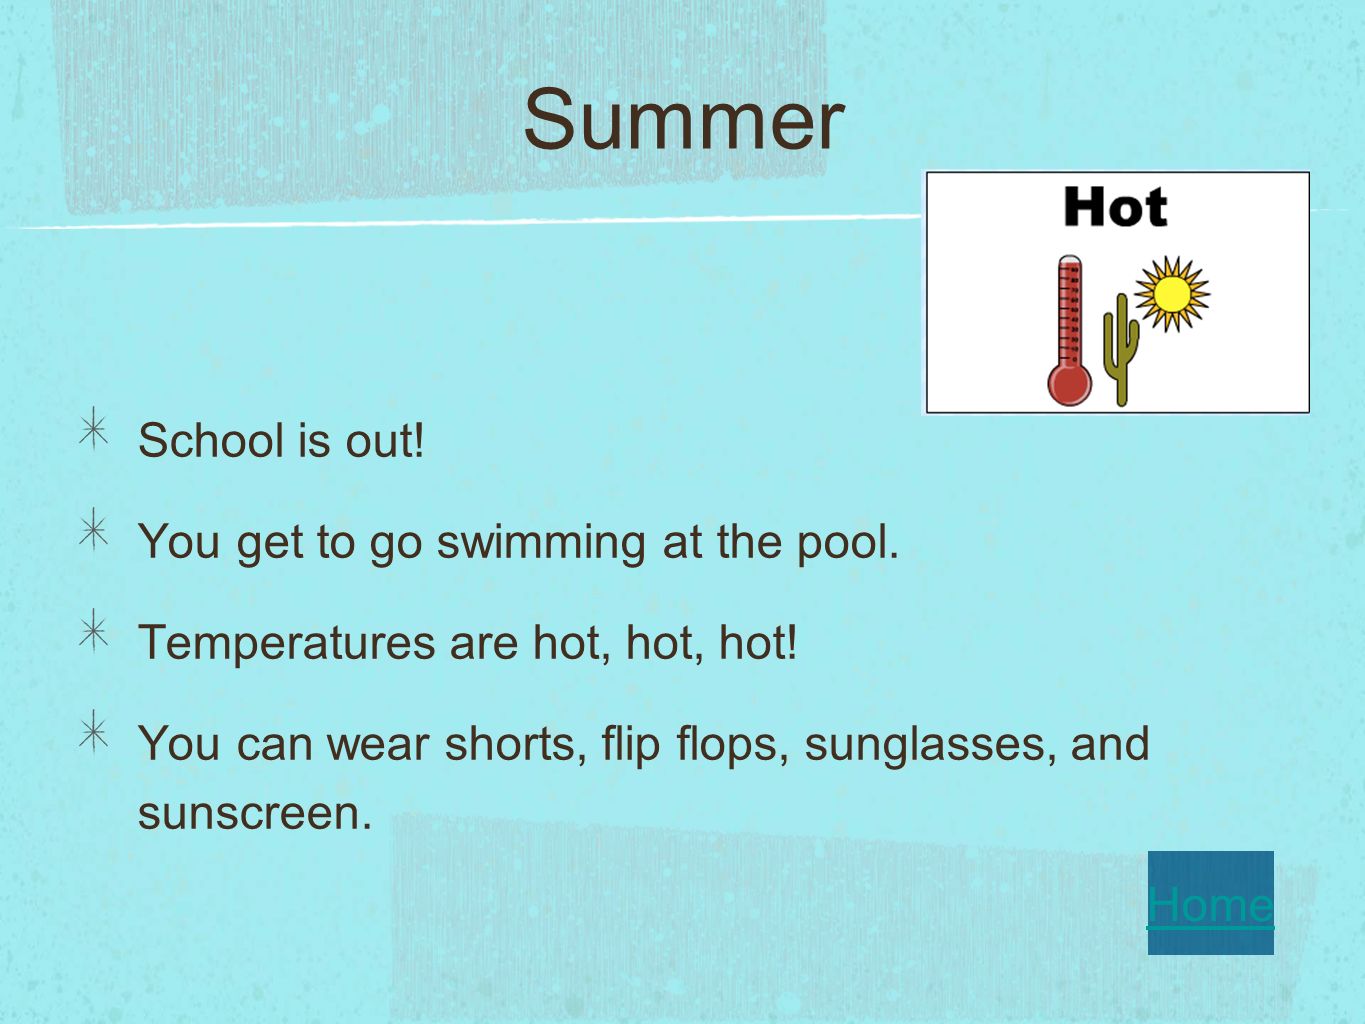 Summer School is out. You get to go swimming at the pool.